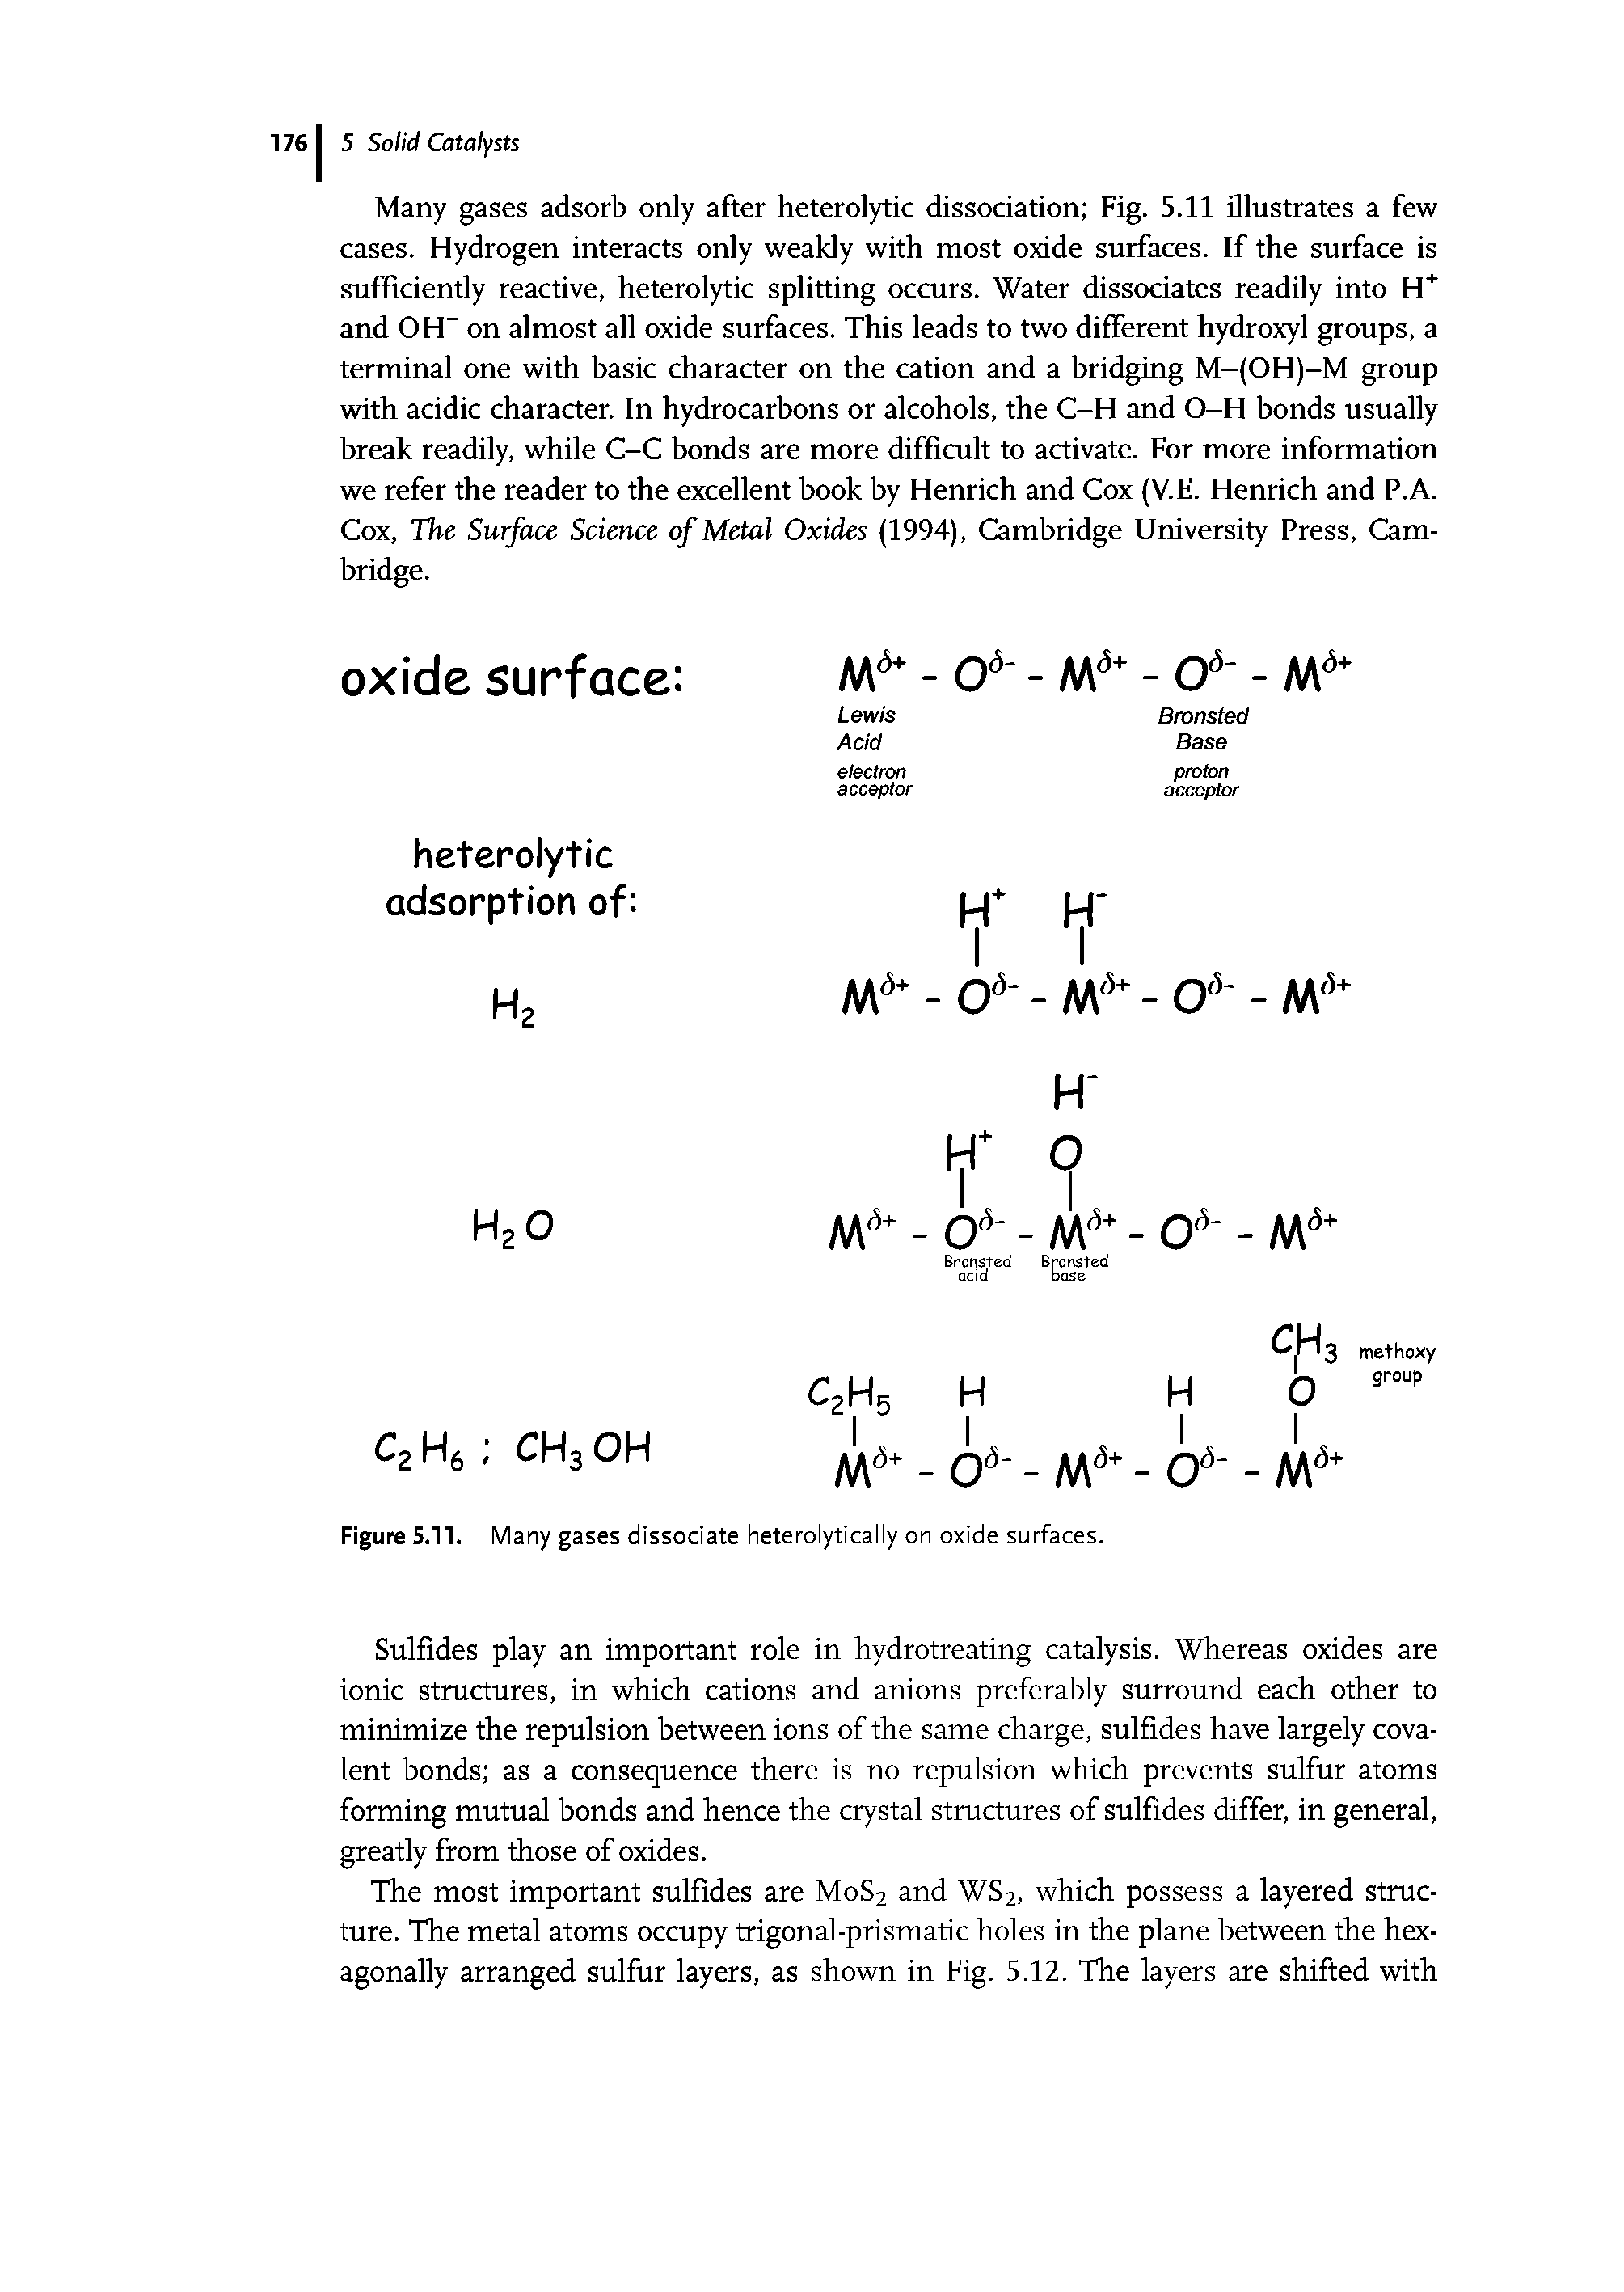 Figure S.U. Many gases dissociate heterolytically on oxide surfaces.